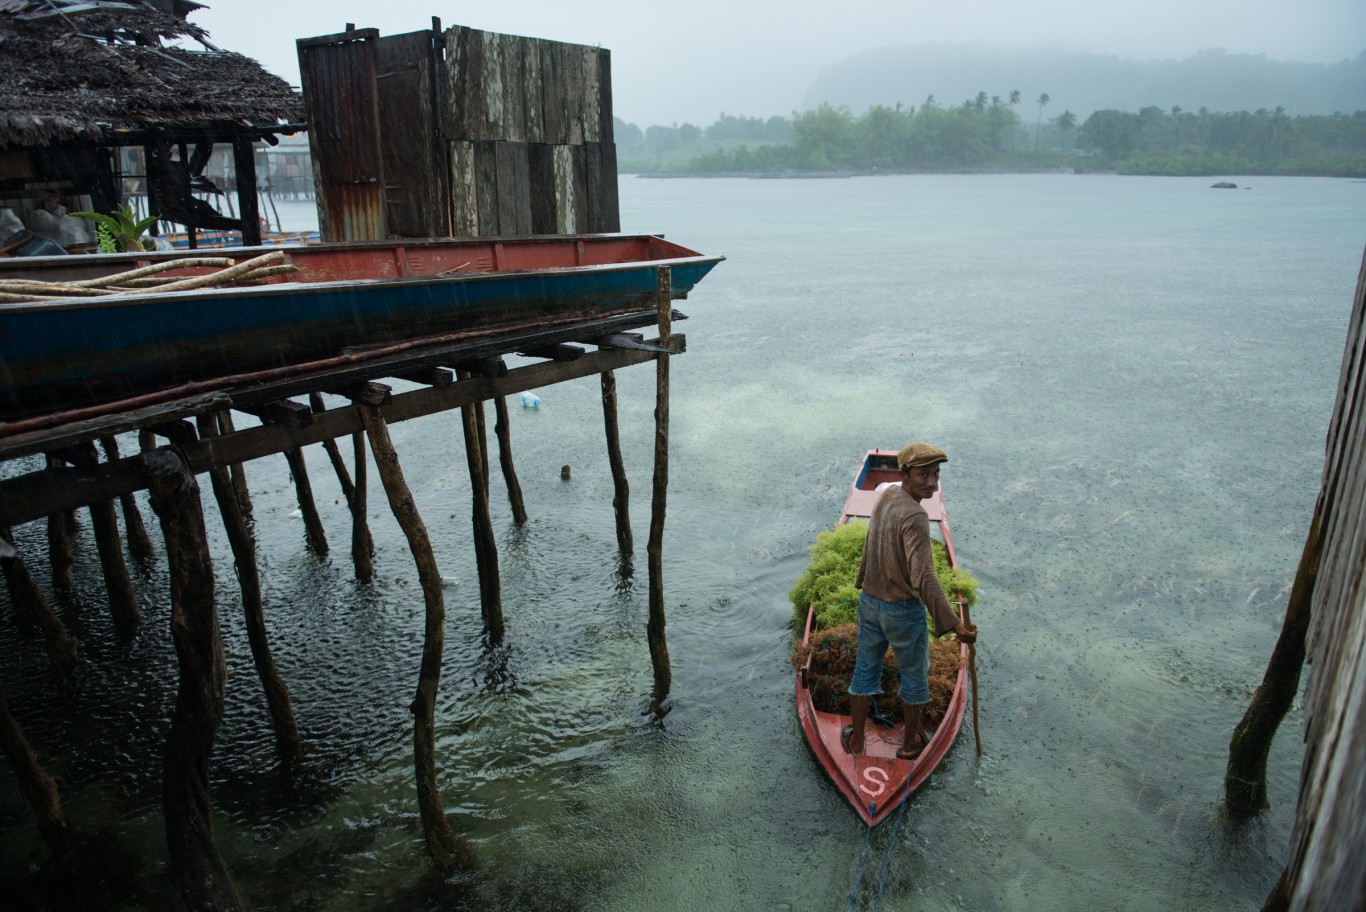 A seaweed farmer heads back home with his harvest